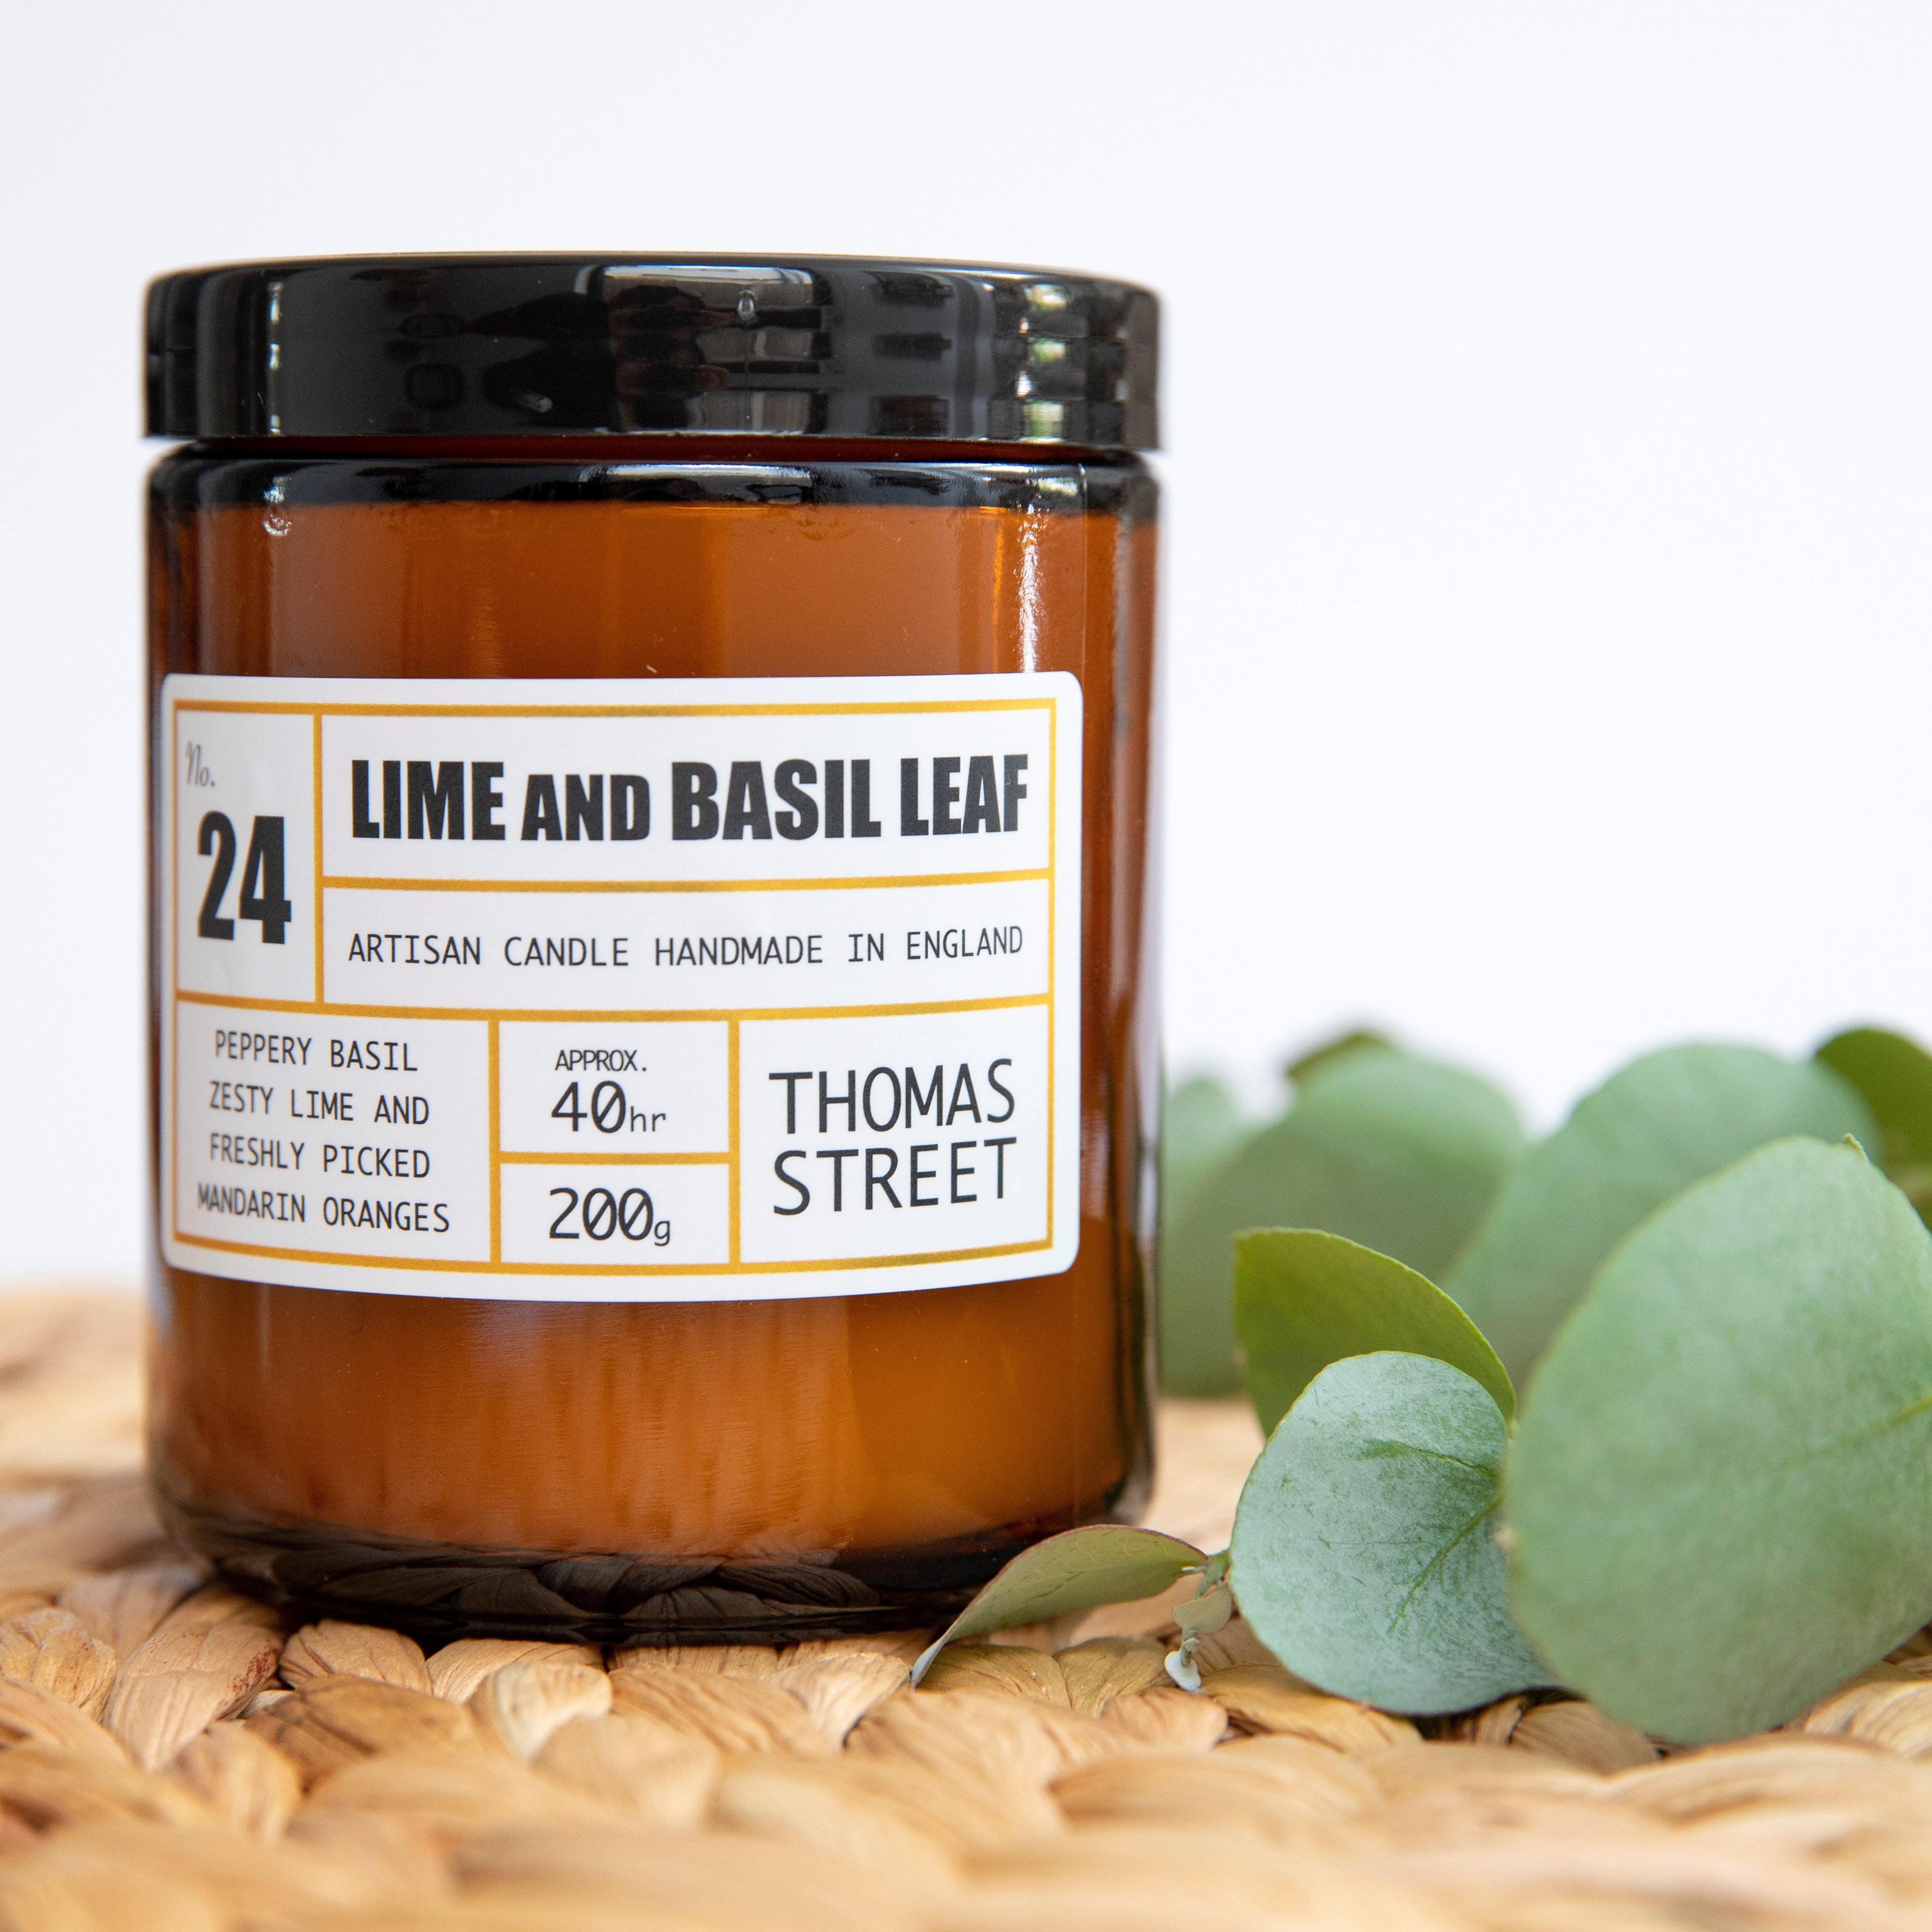 Thomas Street Lime and Basil Leaf Soy Wax Scented Candle